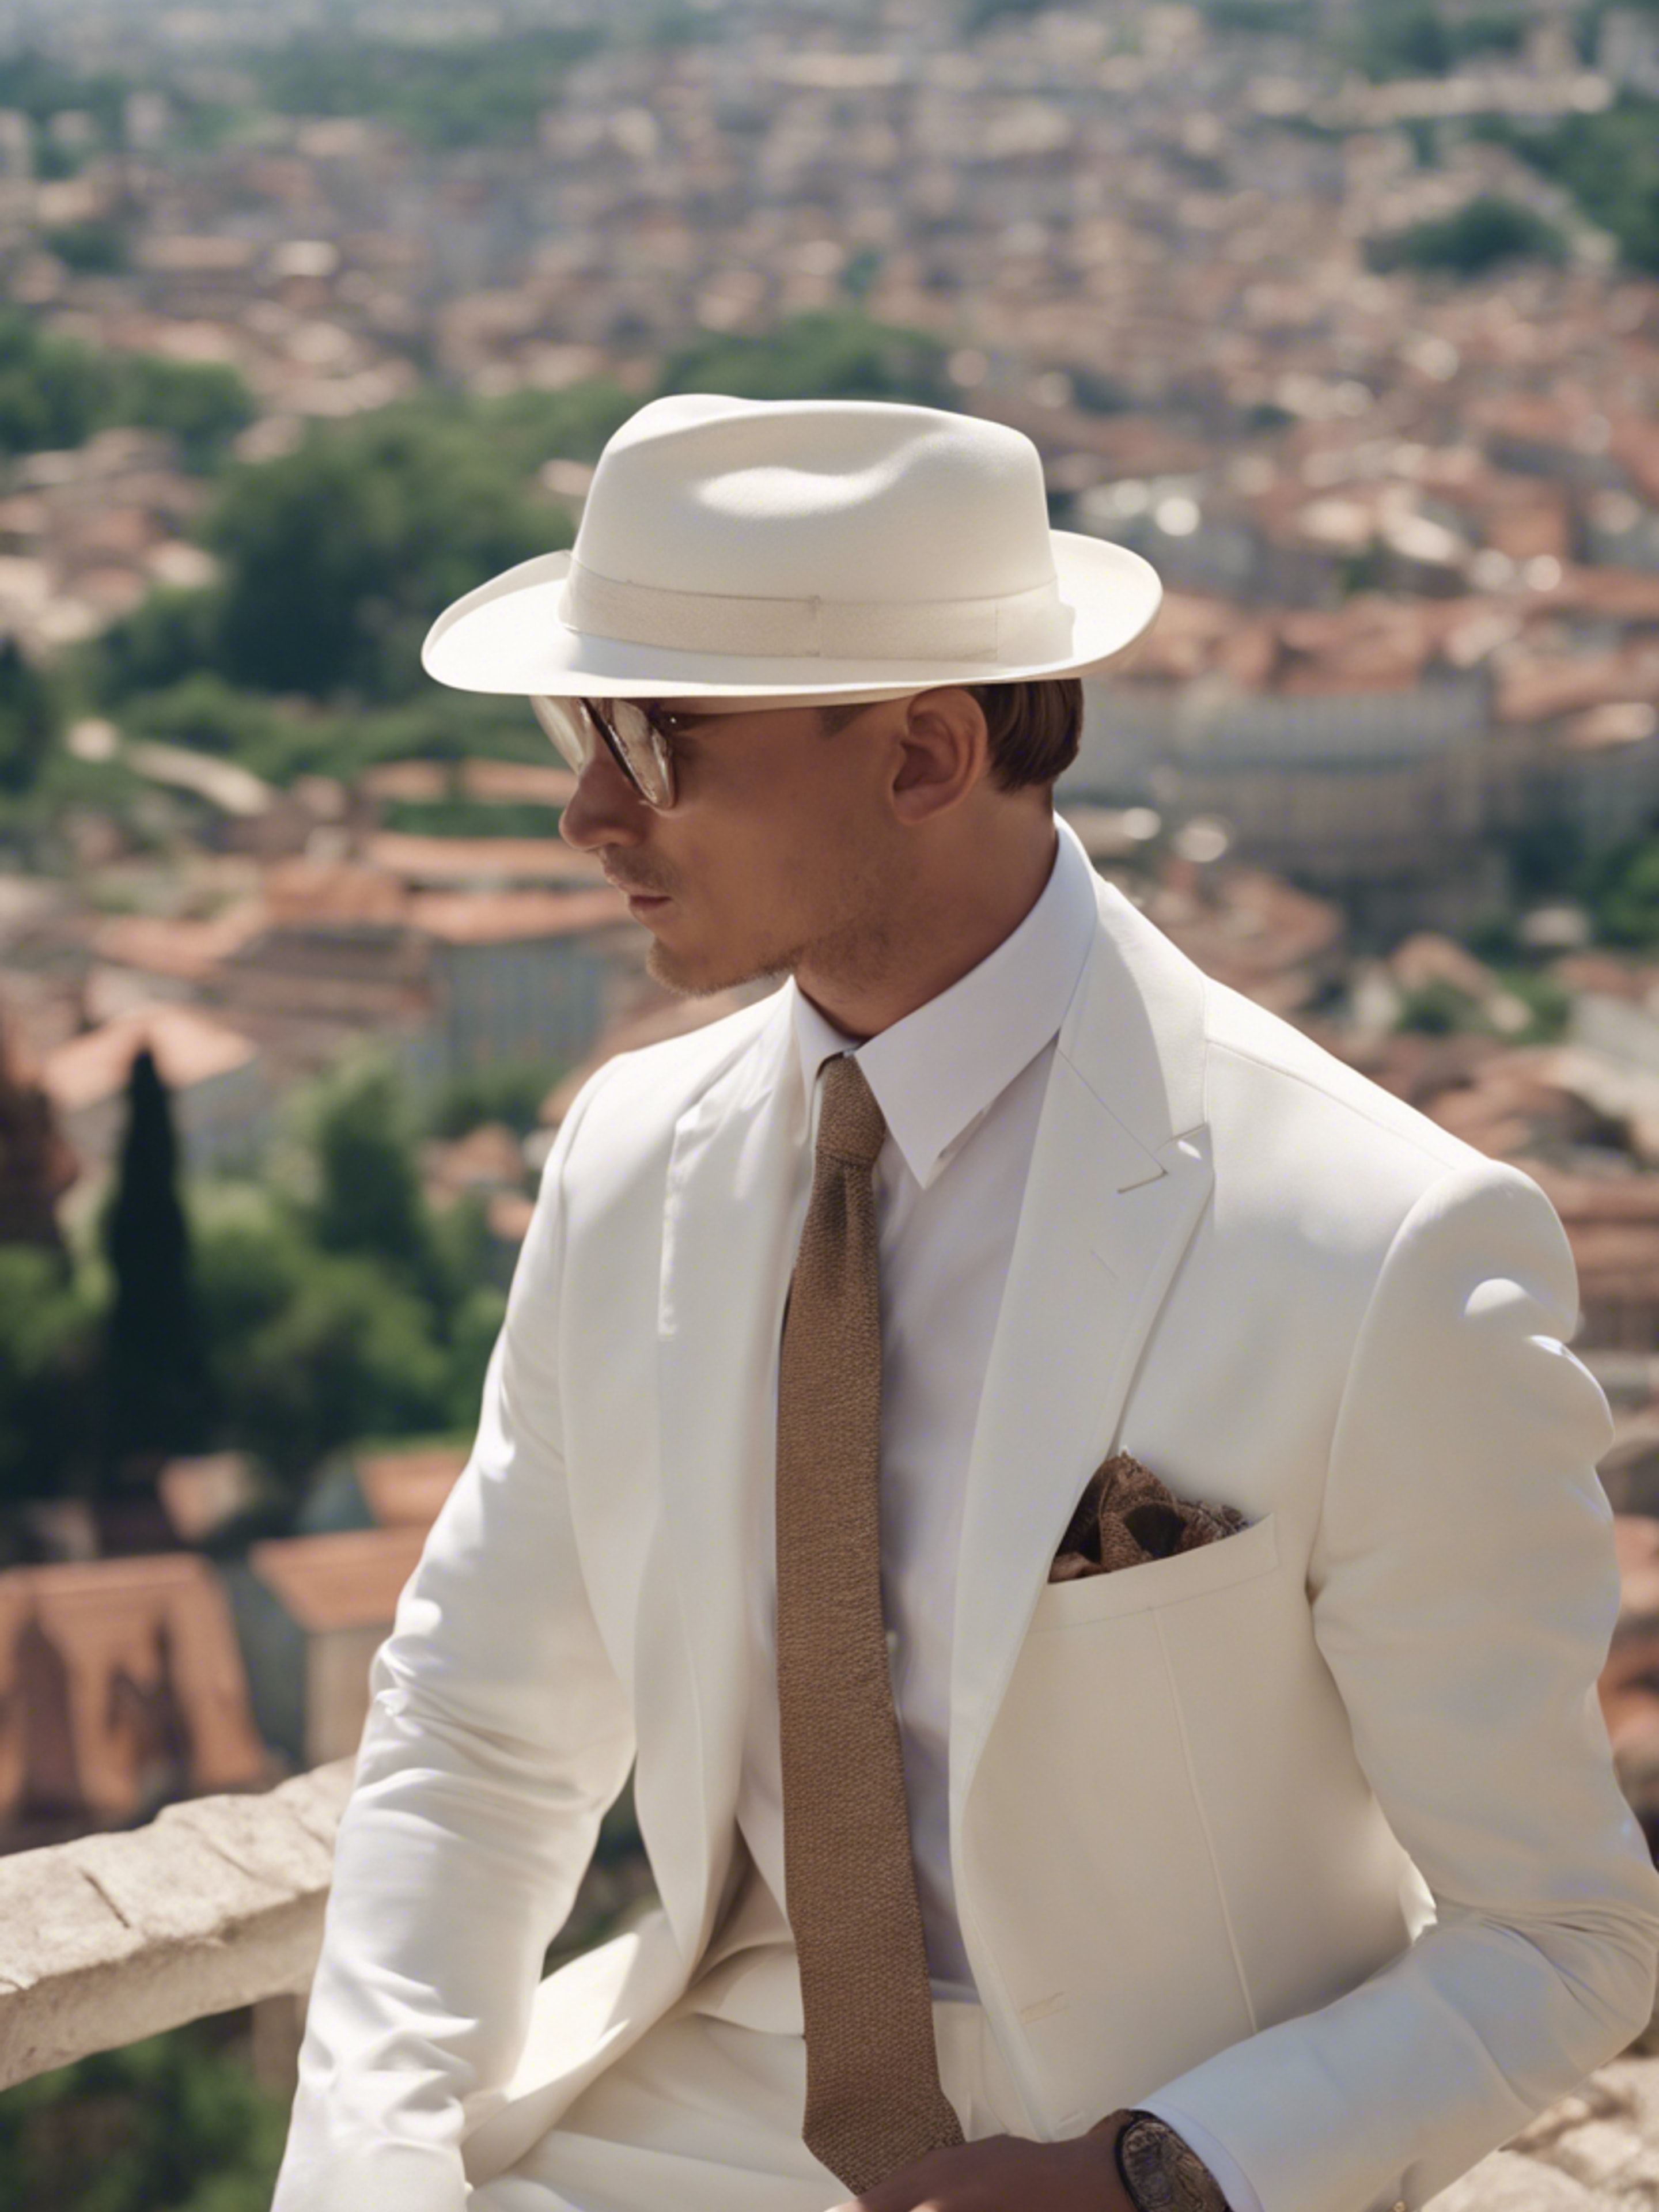 A scenic shot of a preppy man in an immaculate white suit and Panama hat, overlooking an old town from a hill during summer. Wallpaper[792f605c48474f4281e4]